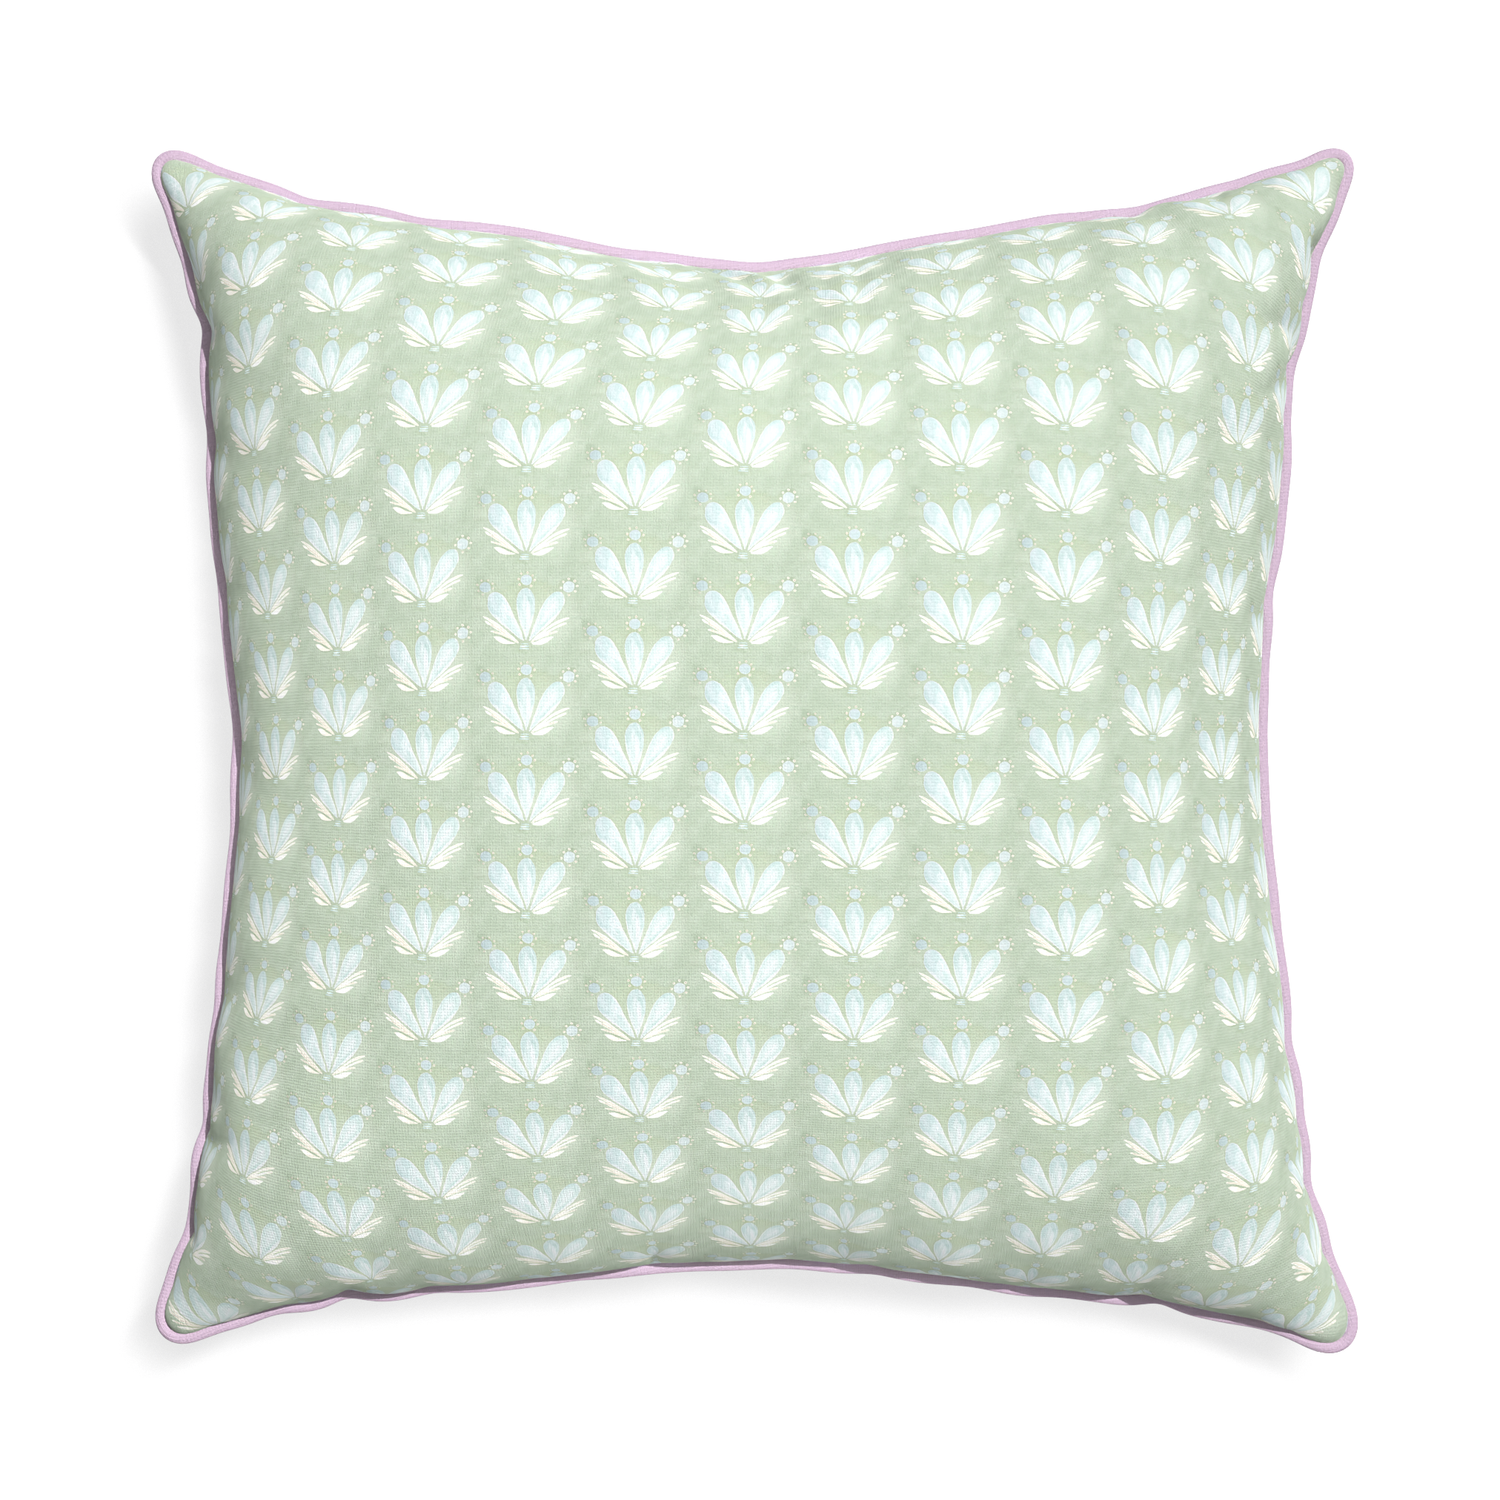 Euro-sham serena sea salt custom blue & green floral drop repeatpillow with l piping on white background